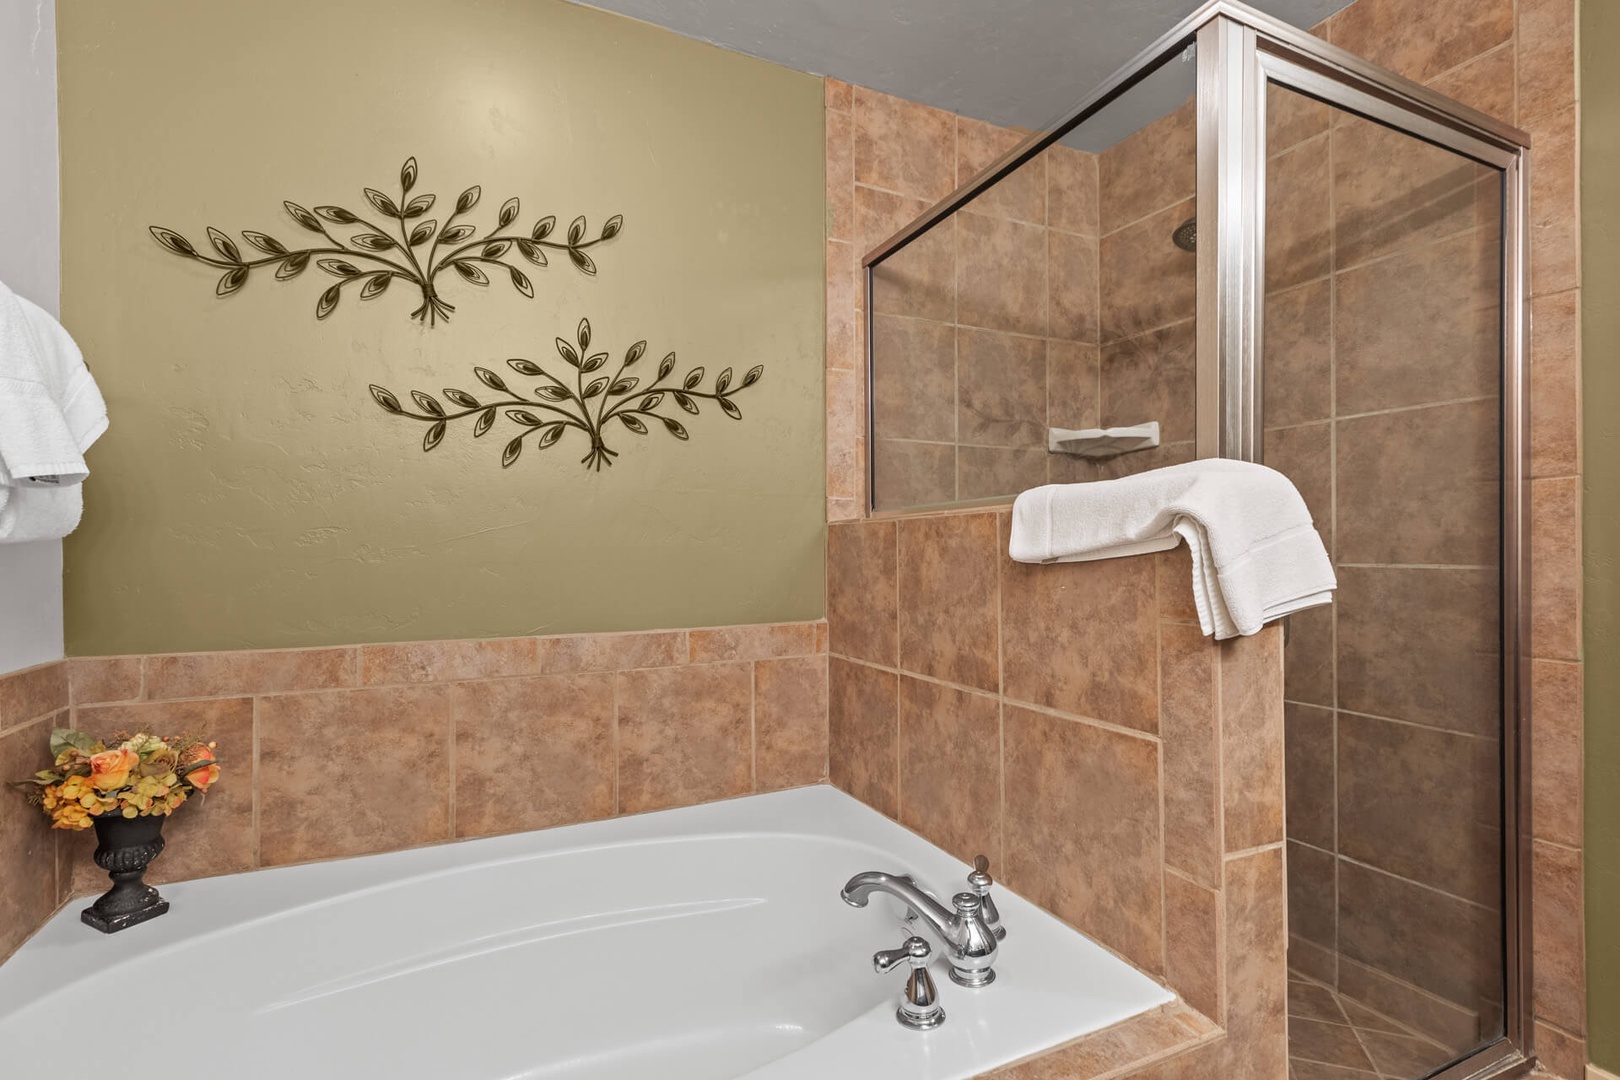 Bear Hollow Lodges 4201: Step-in shower and luxurious tub in the bathroom attached to the primary bedroom.